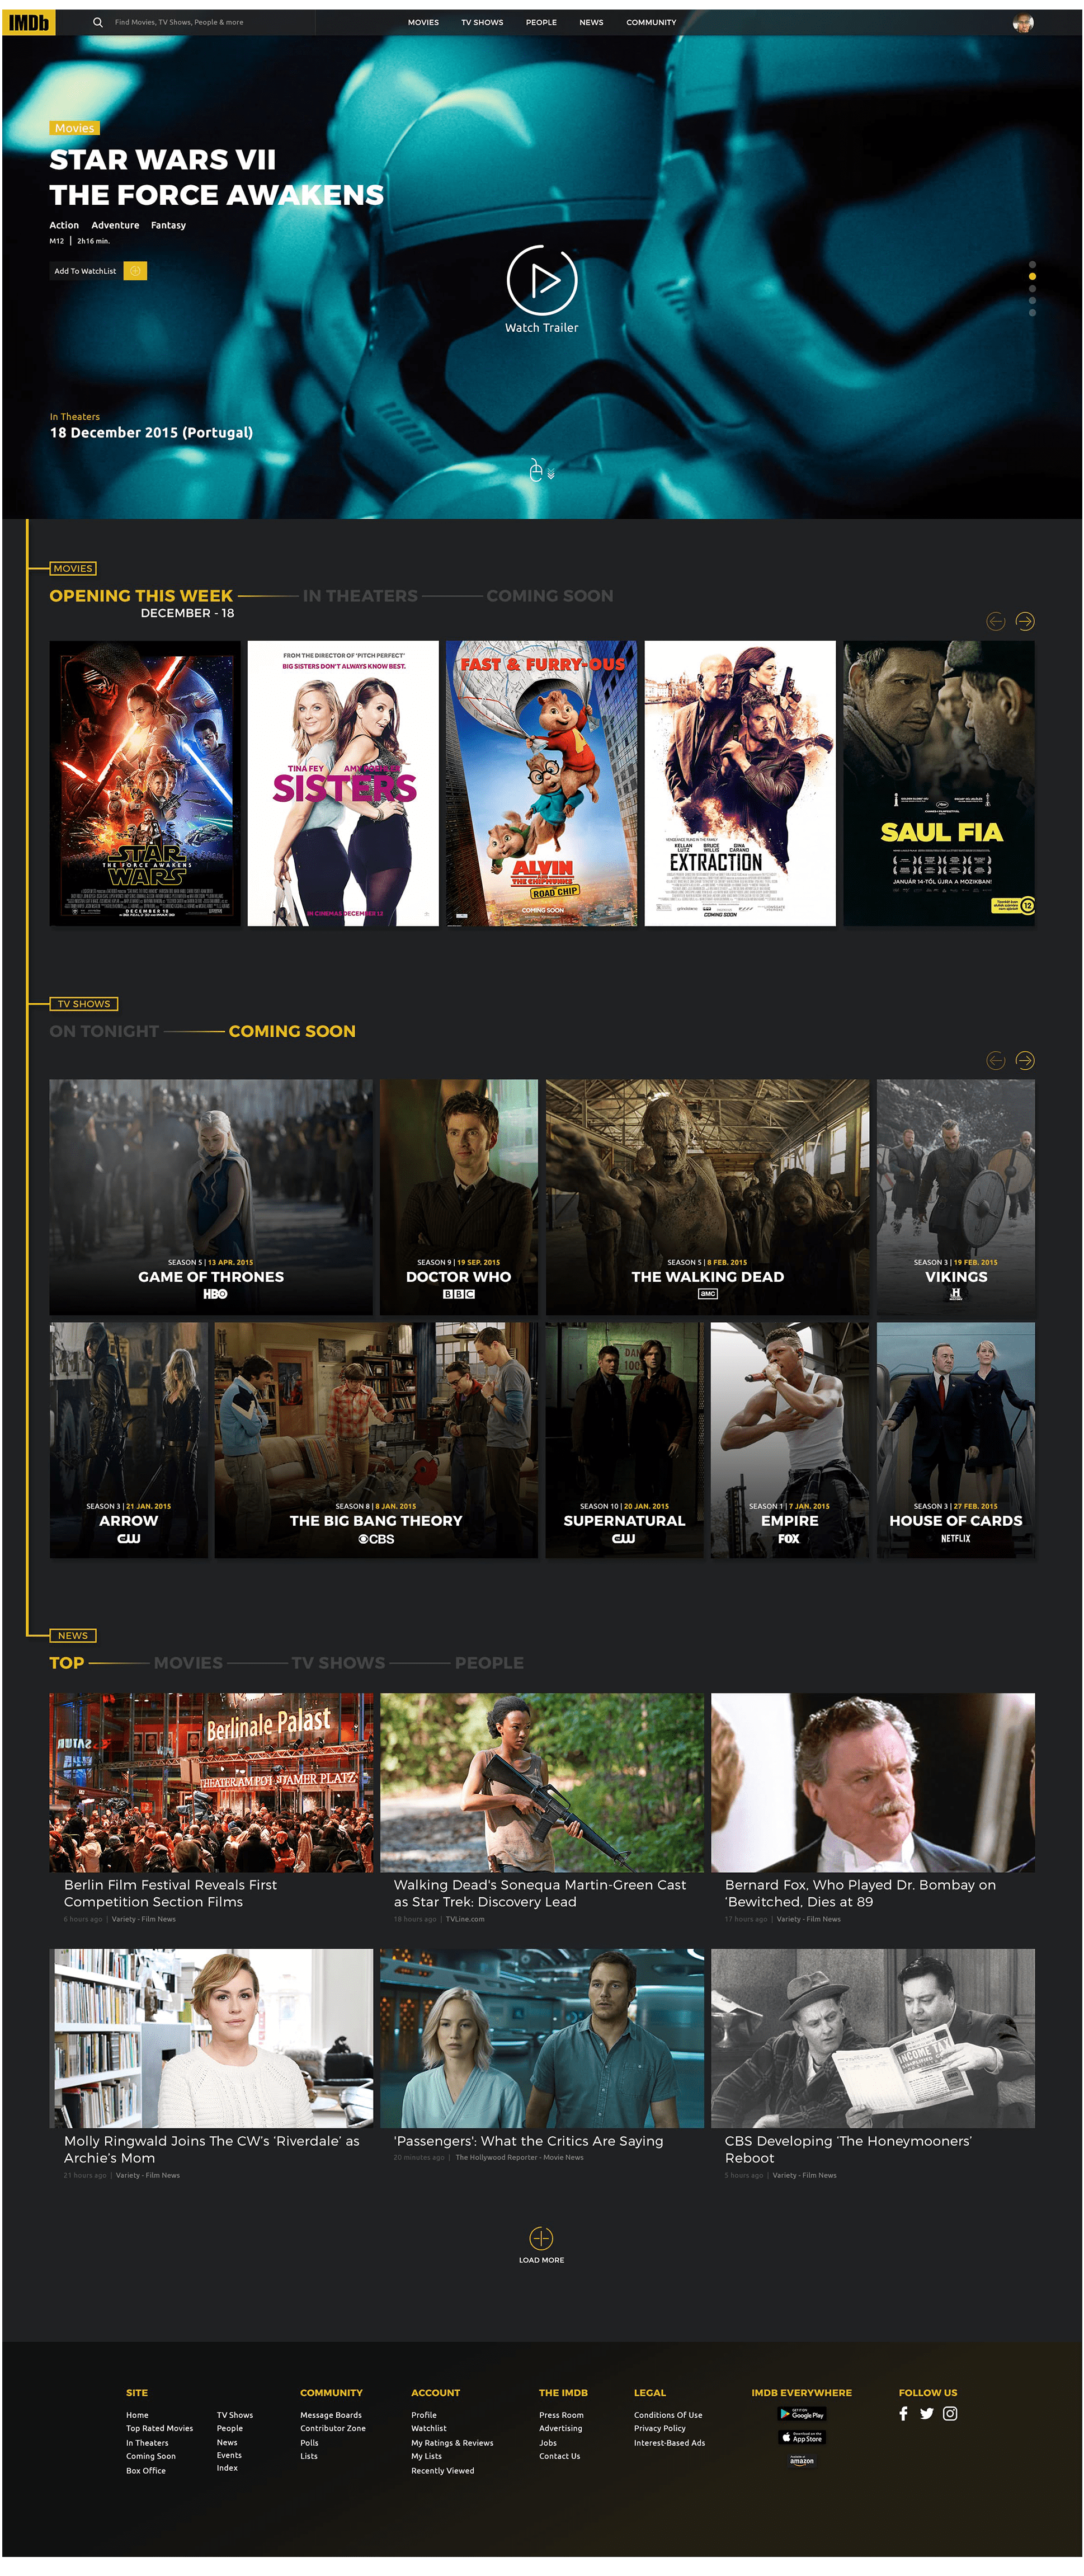 IMDb Web Title Subpages Redesign